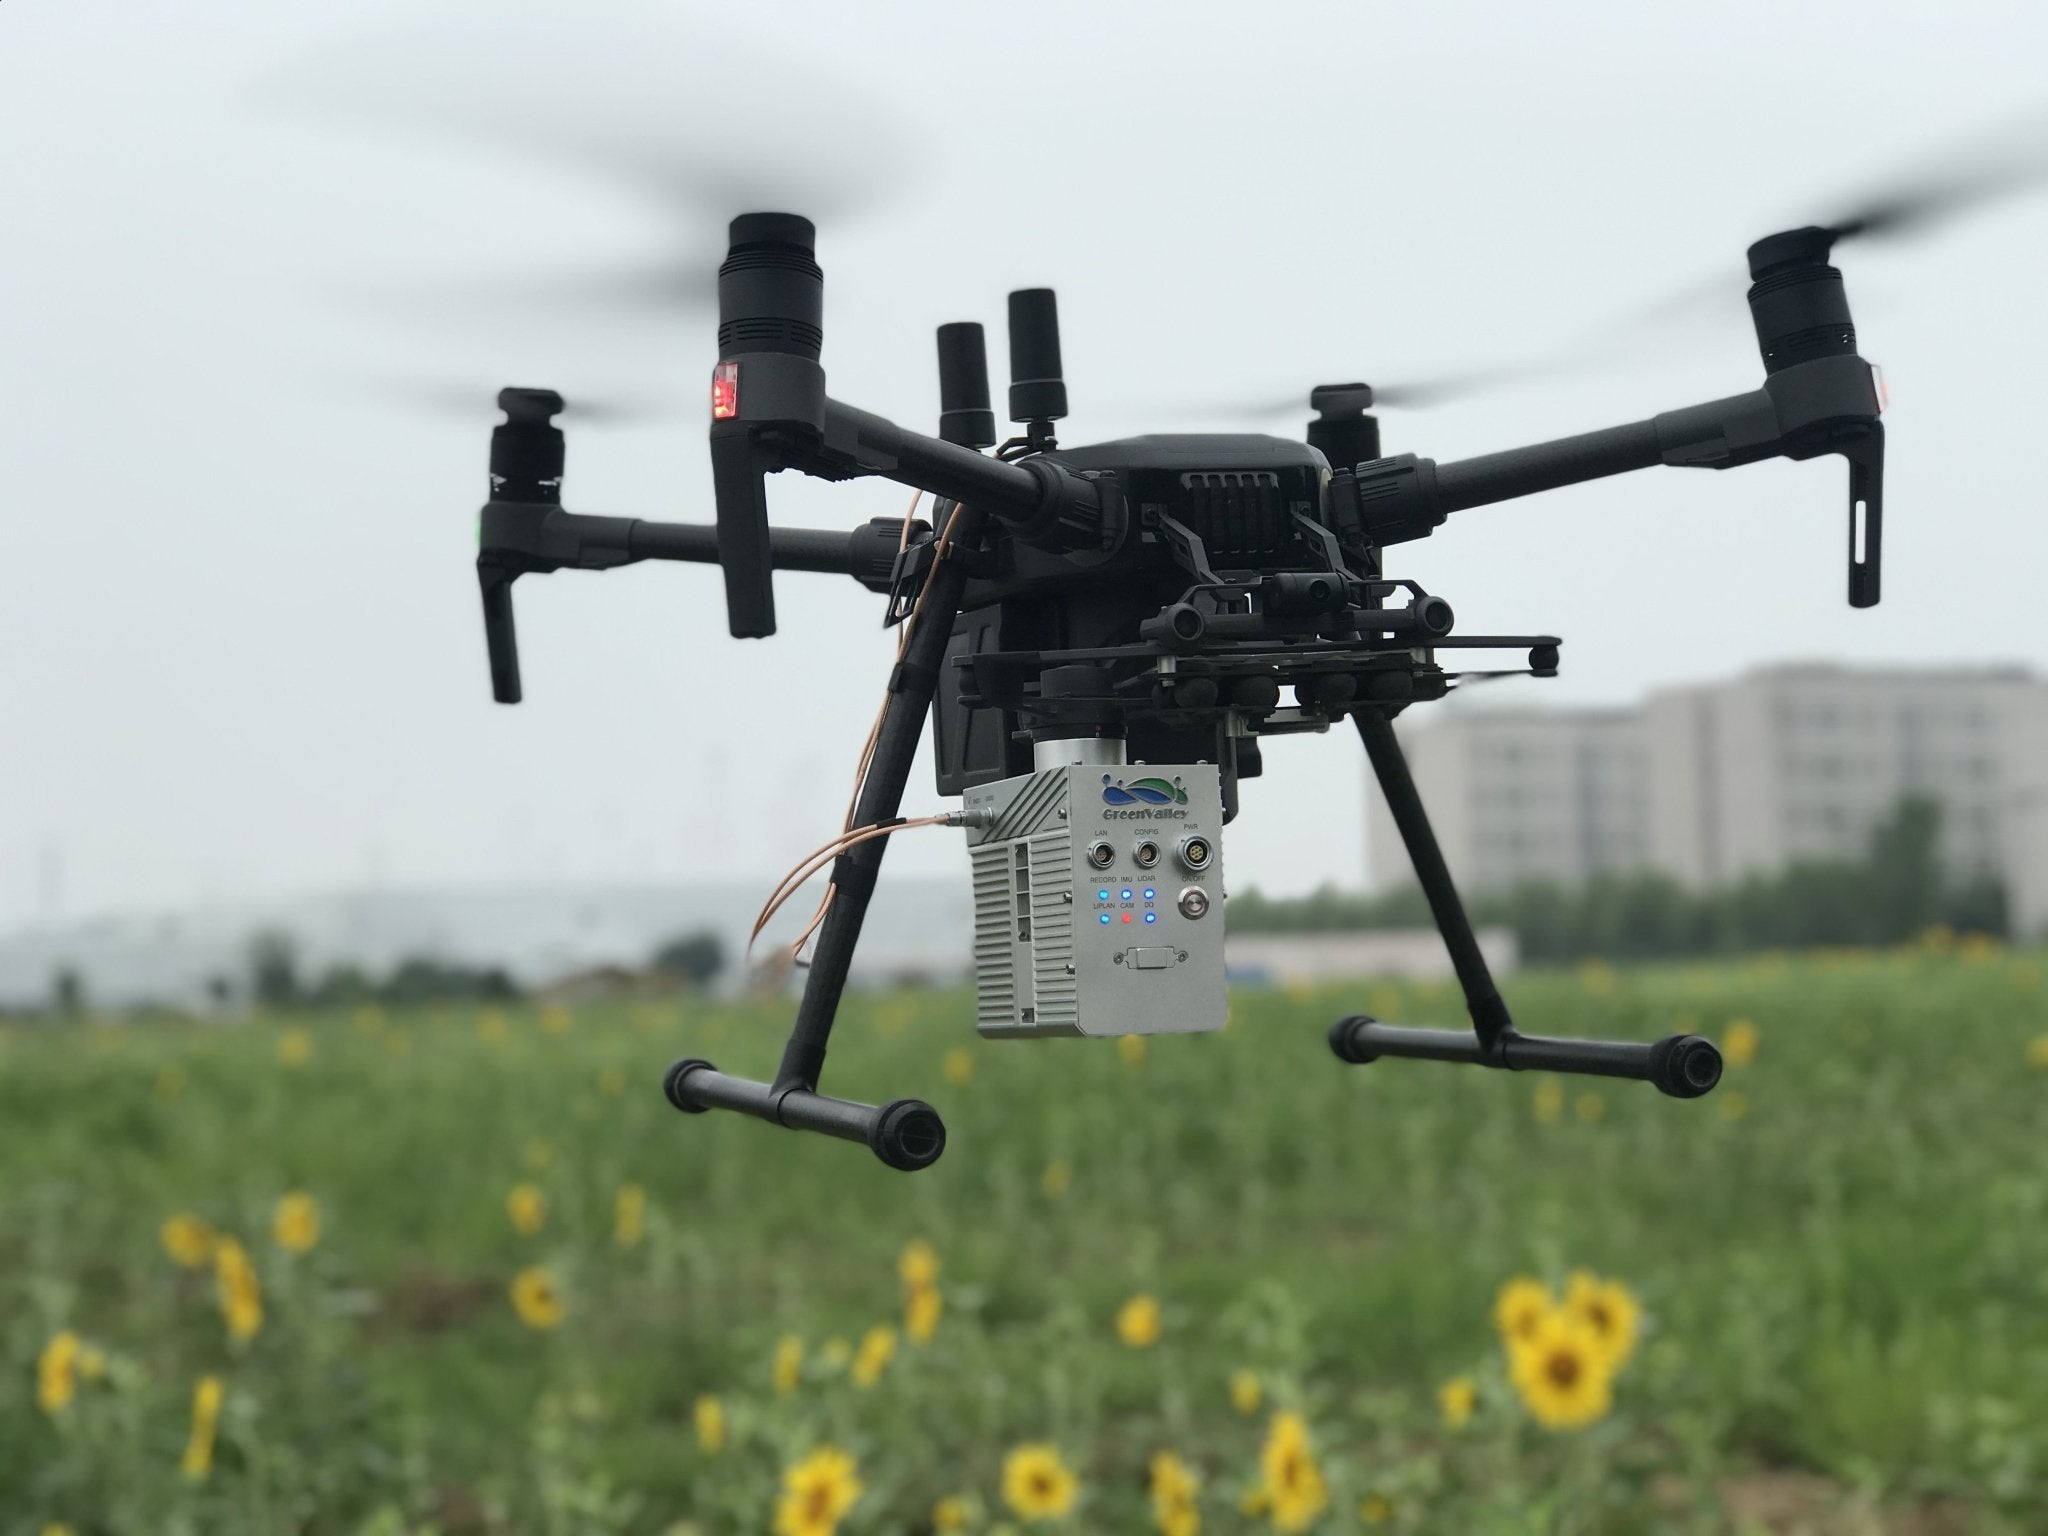 There are many types of quadcopters available for sale
